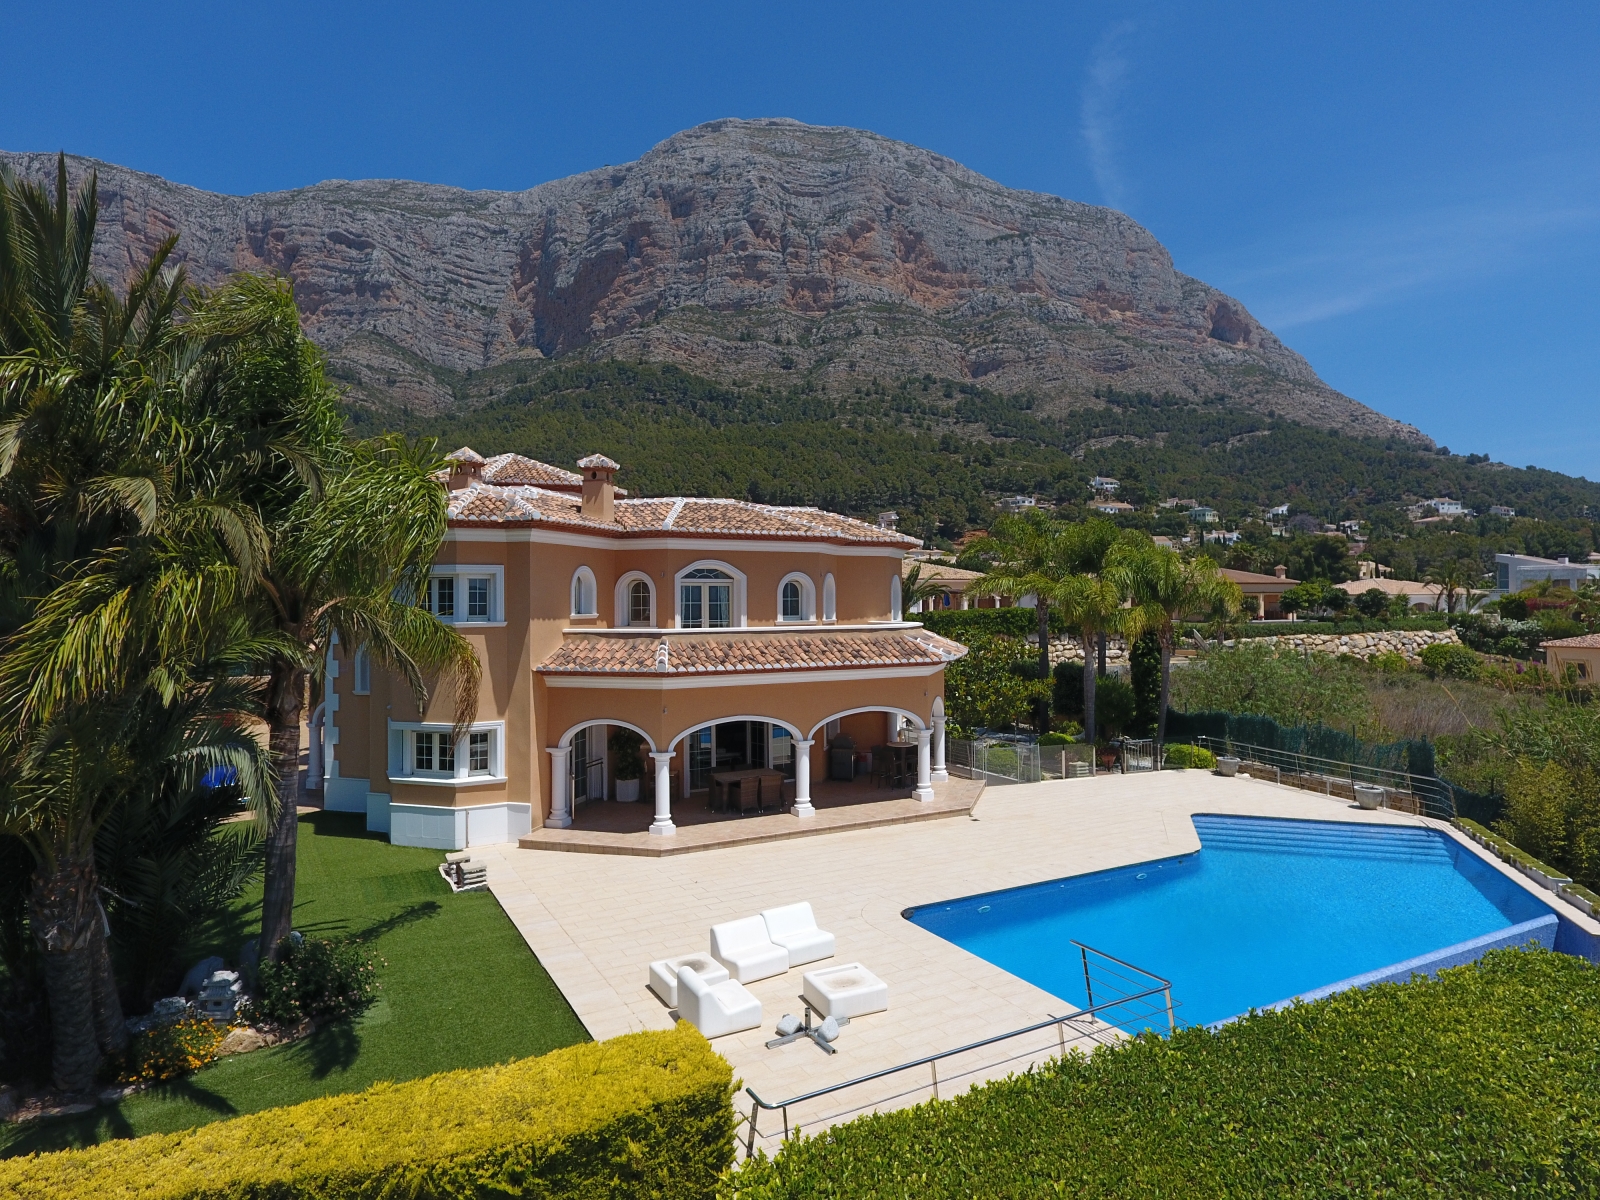 Top-quality villa with infinity pool, BBQ, children playground, double garage, massive basement, garden, balcony, terrace, full of details, in the south side of Montgo.